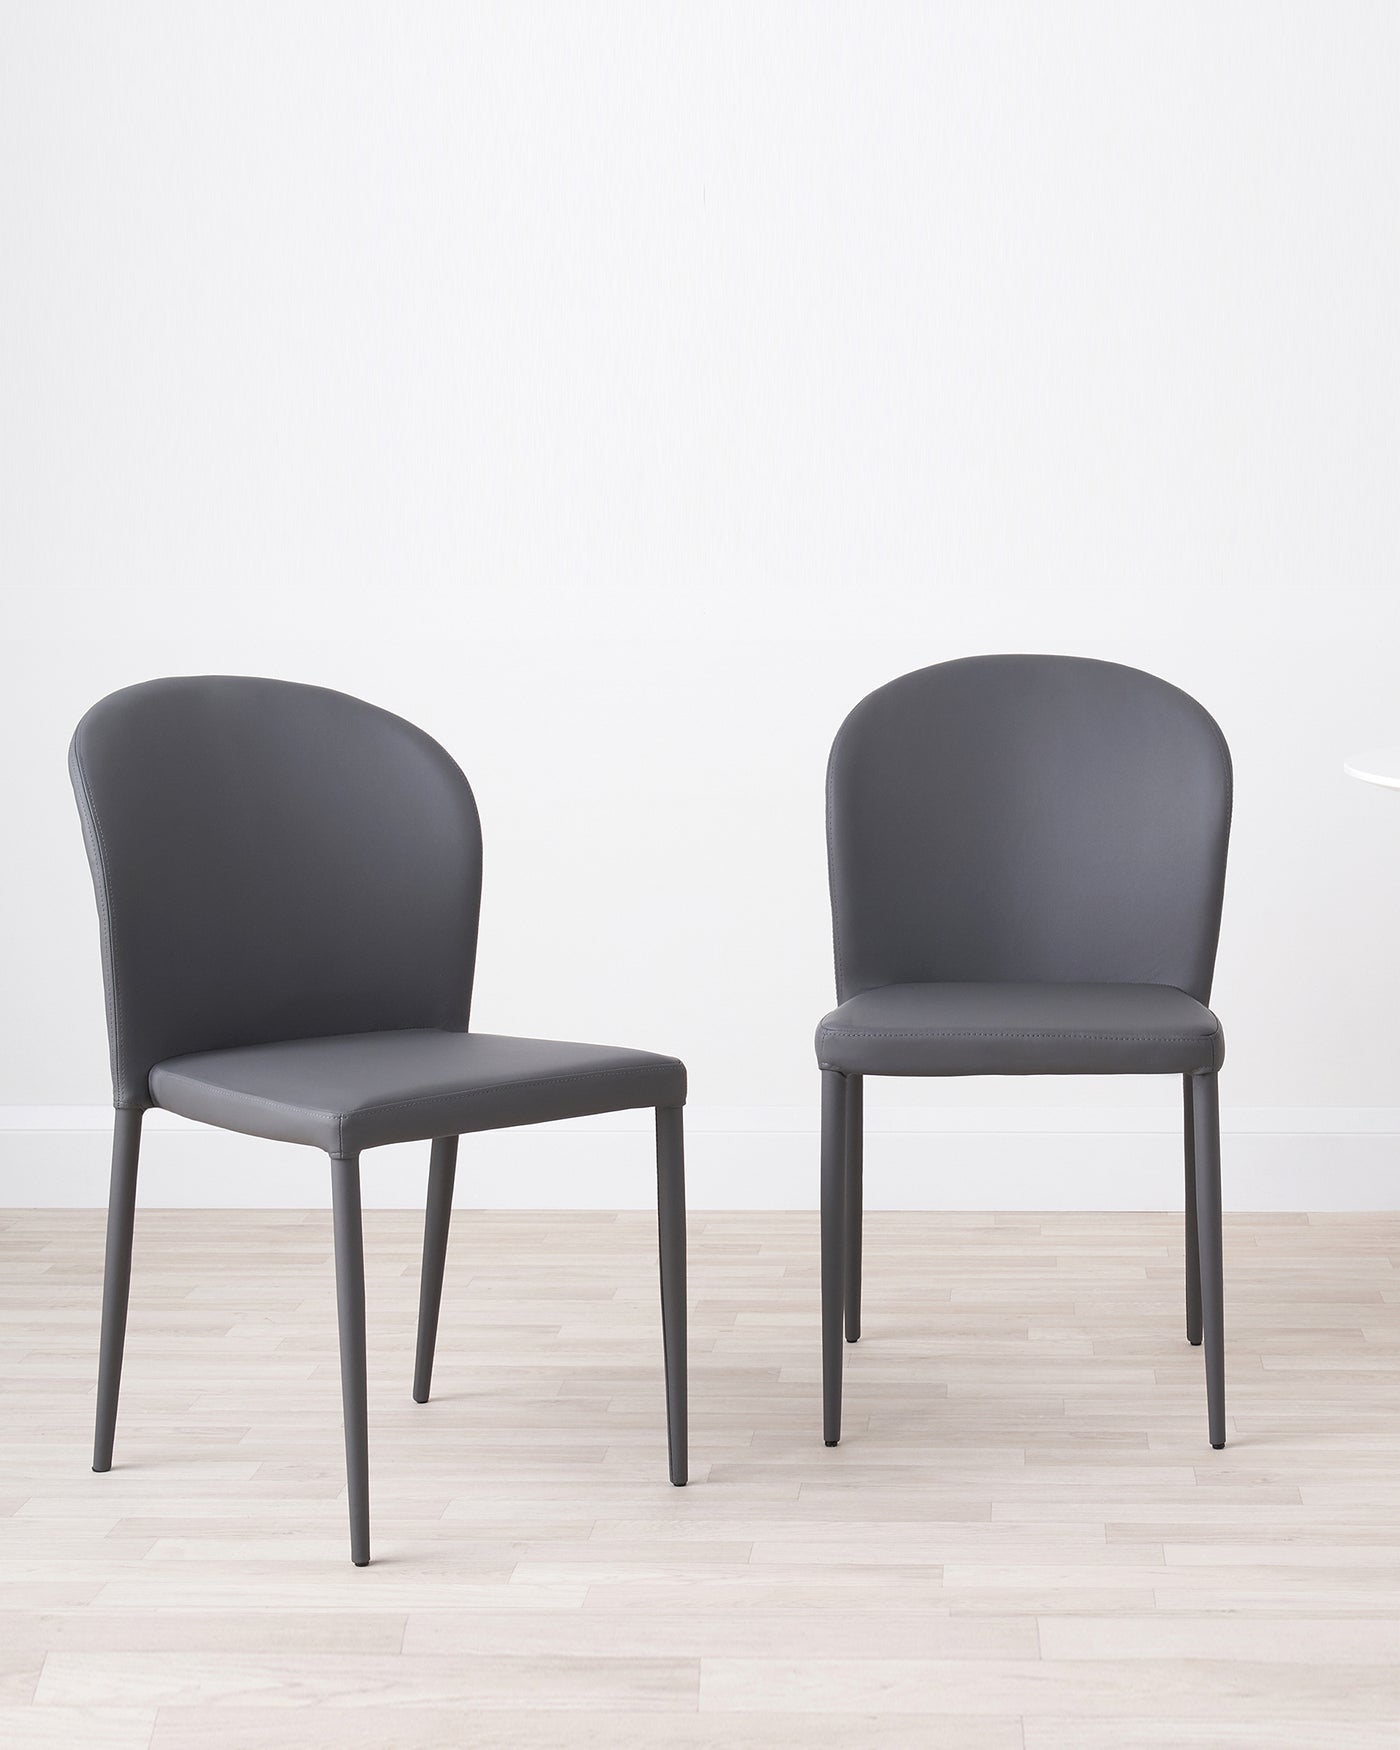 Two modern grey upholstered dining chairs with sleek black metal legs, set on a light hardwood floor against a plain white wall.